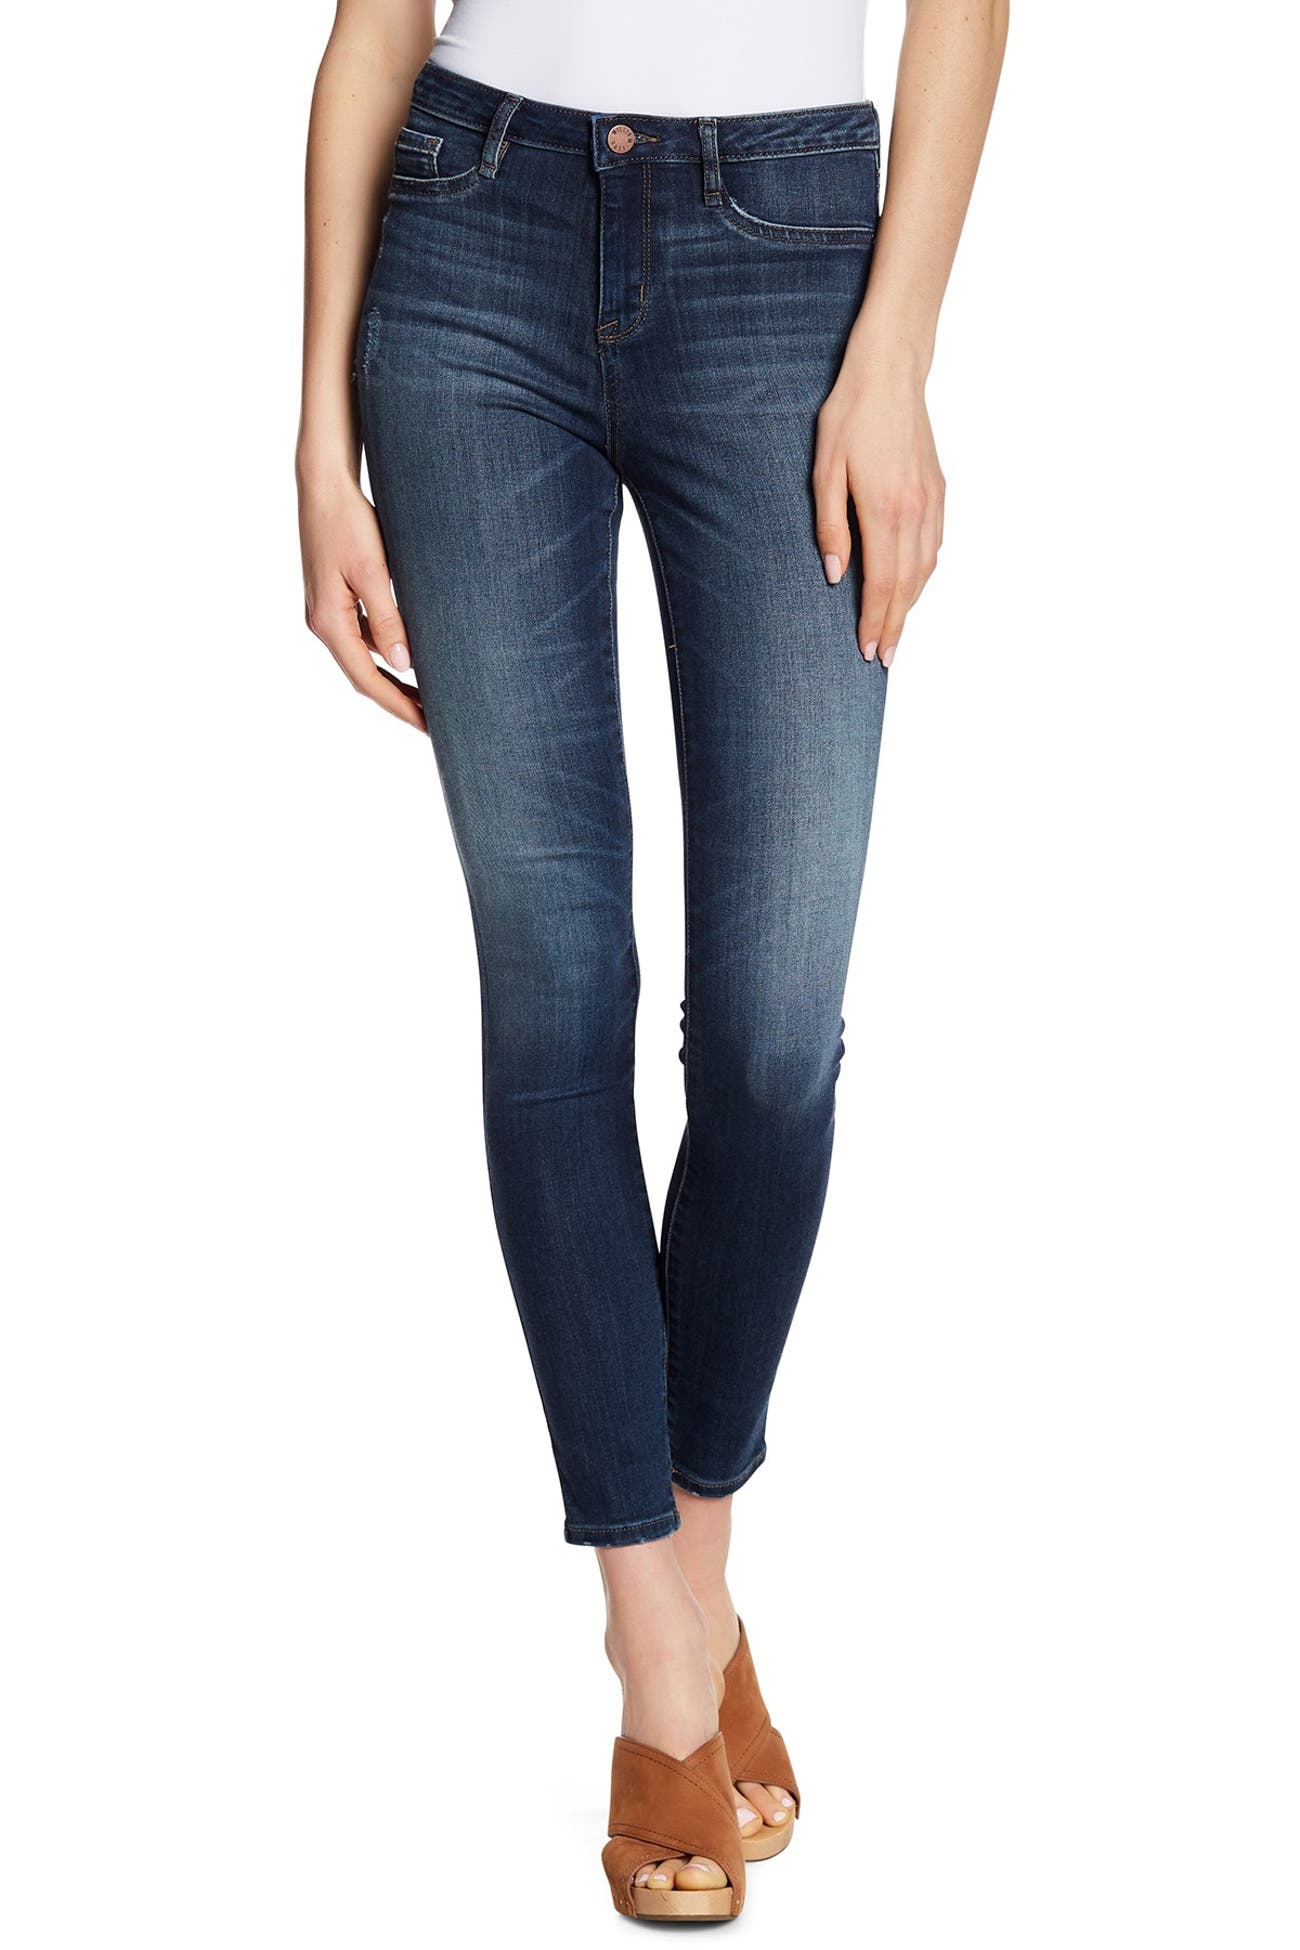 William Rast | Sculpted High Waisted Skinny Jeans | Nordstrom Rack